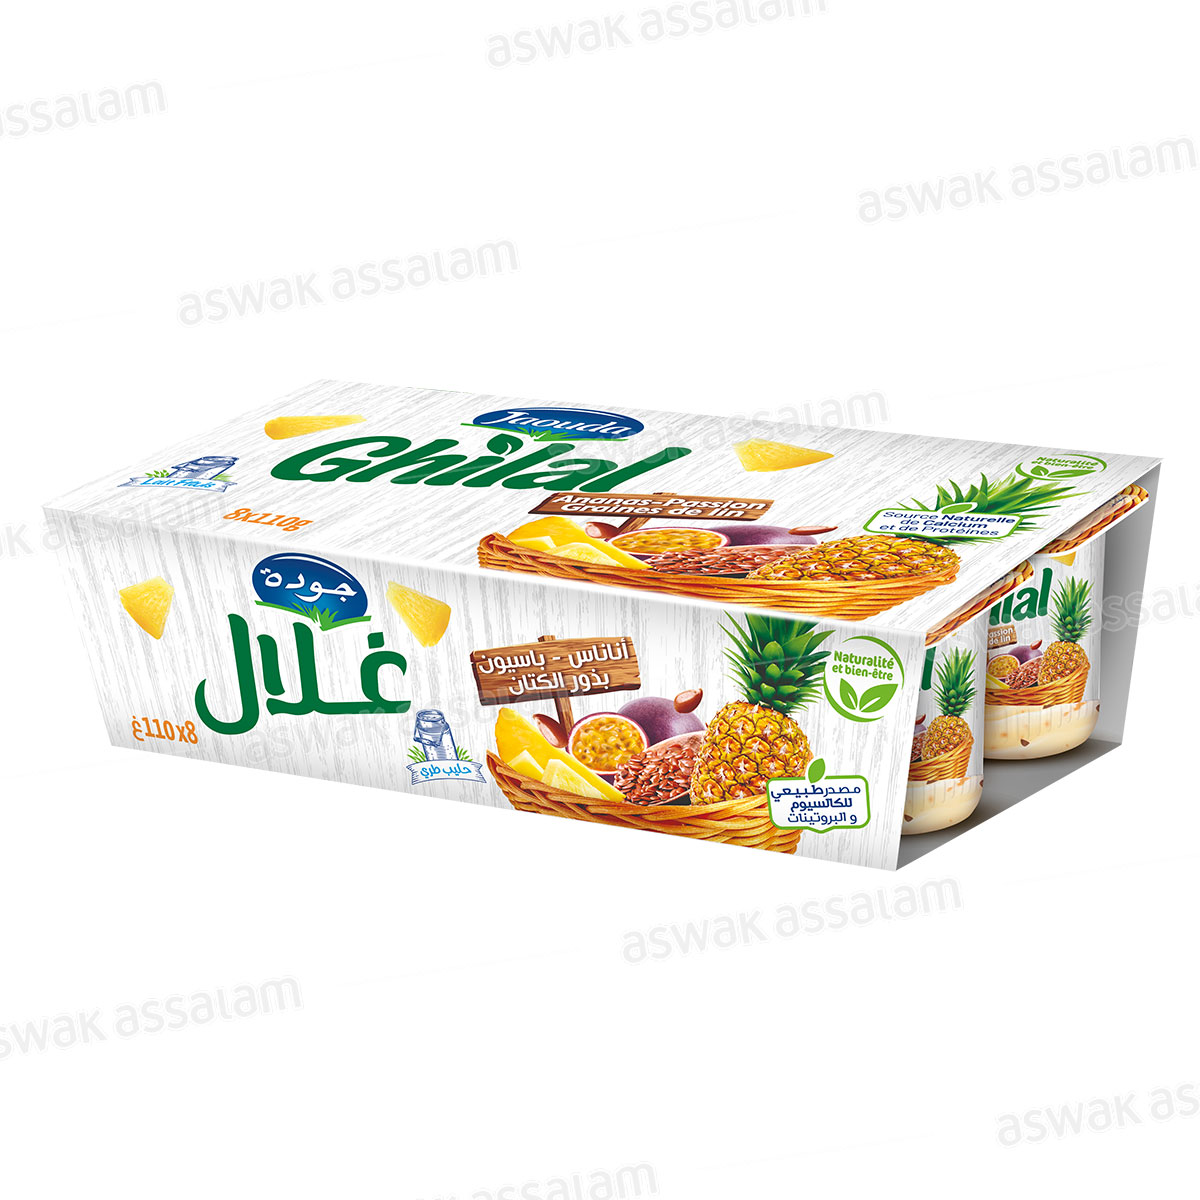 YAOURT GHILAL ANANAS PASSION GRAINES DE LIN 8*110G PACK JAOUDA